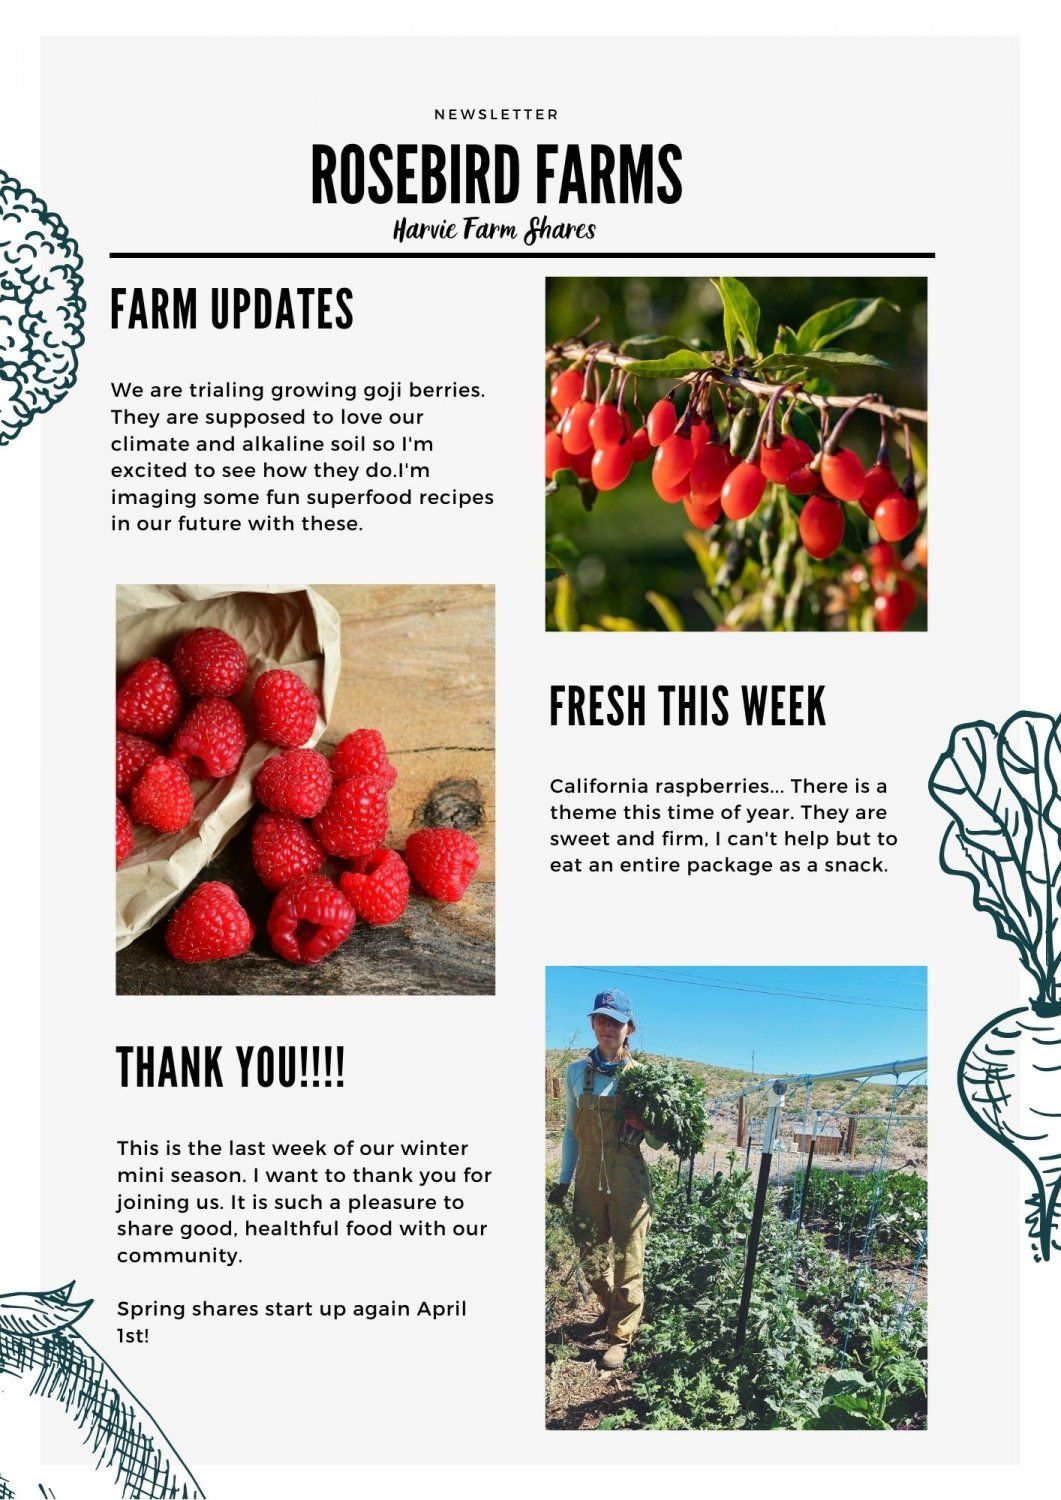 Next Happening: Farm Happenings for March 11, 2021